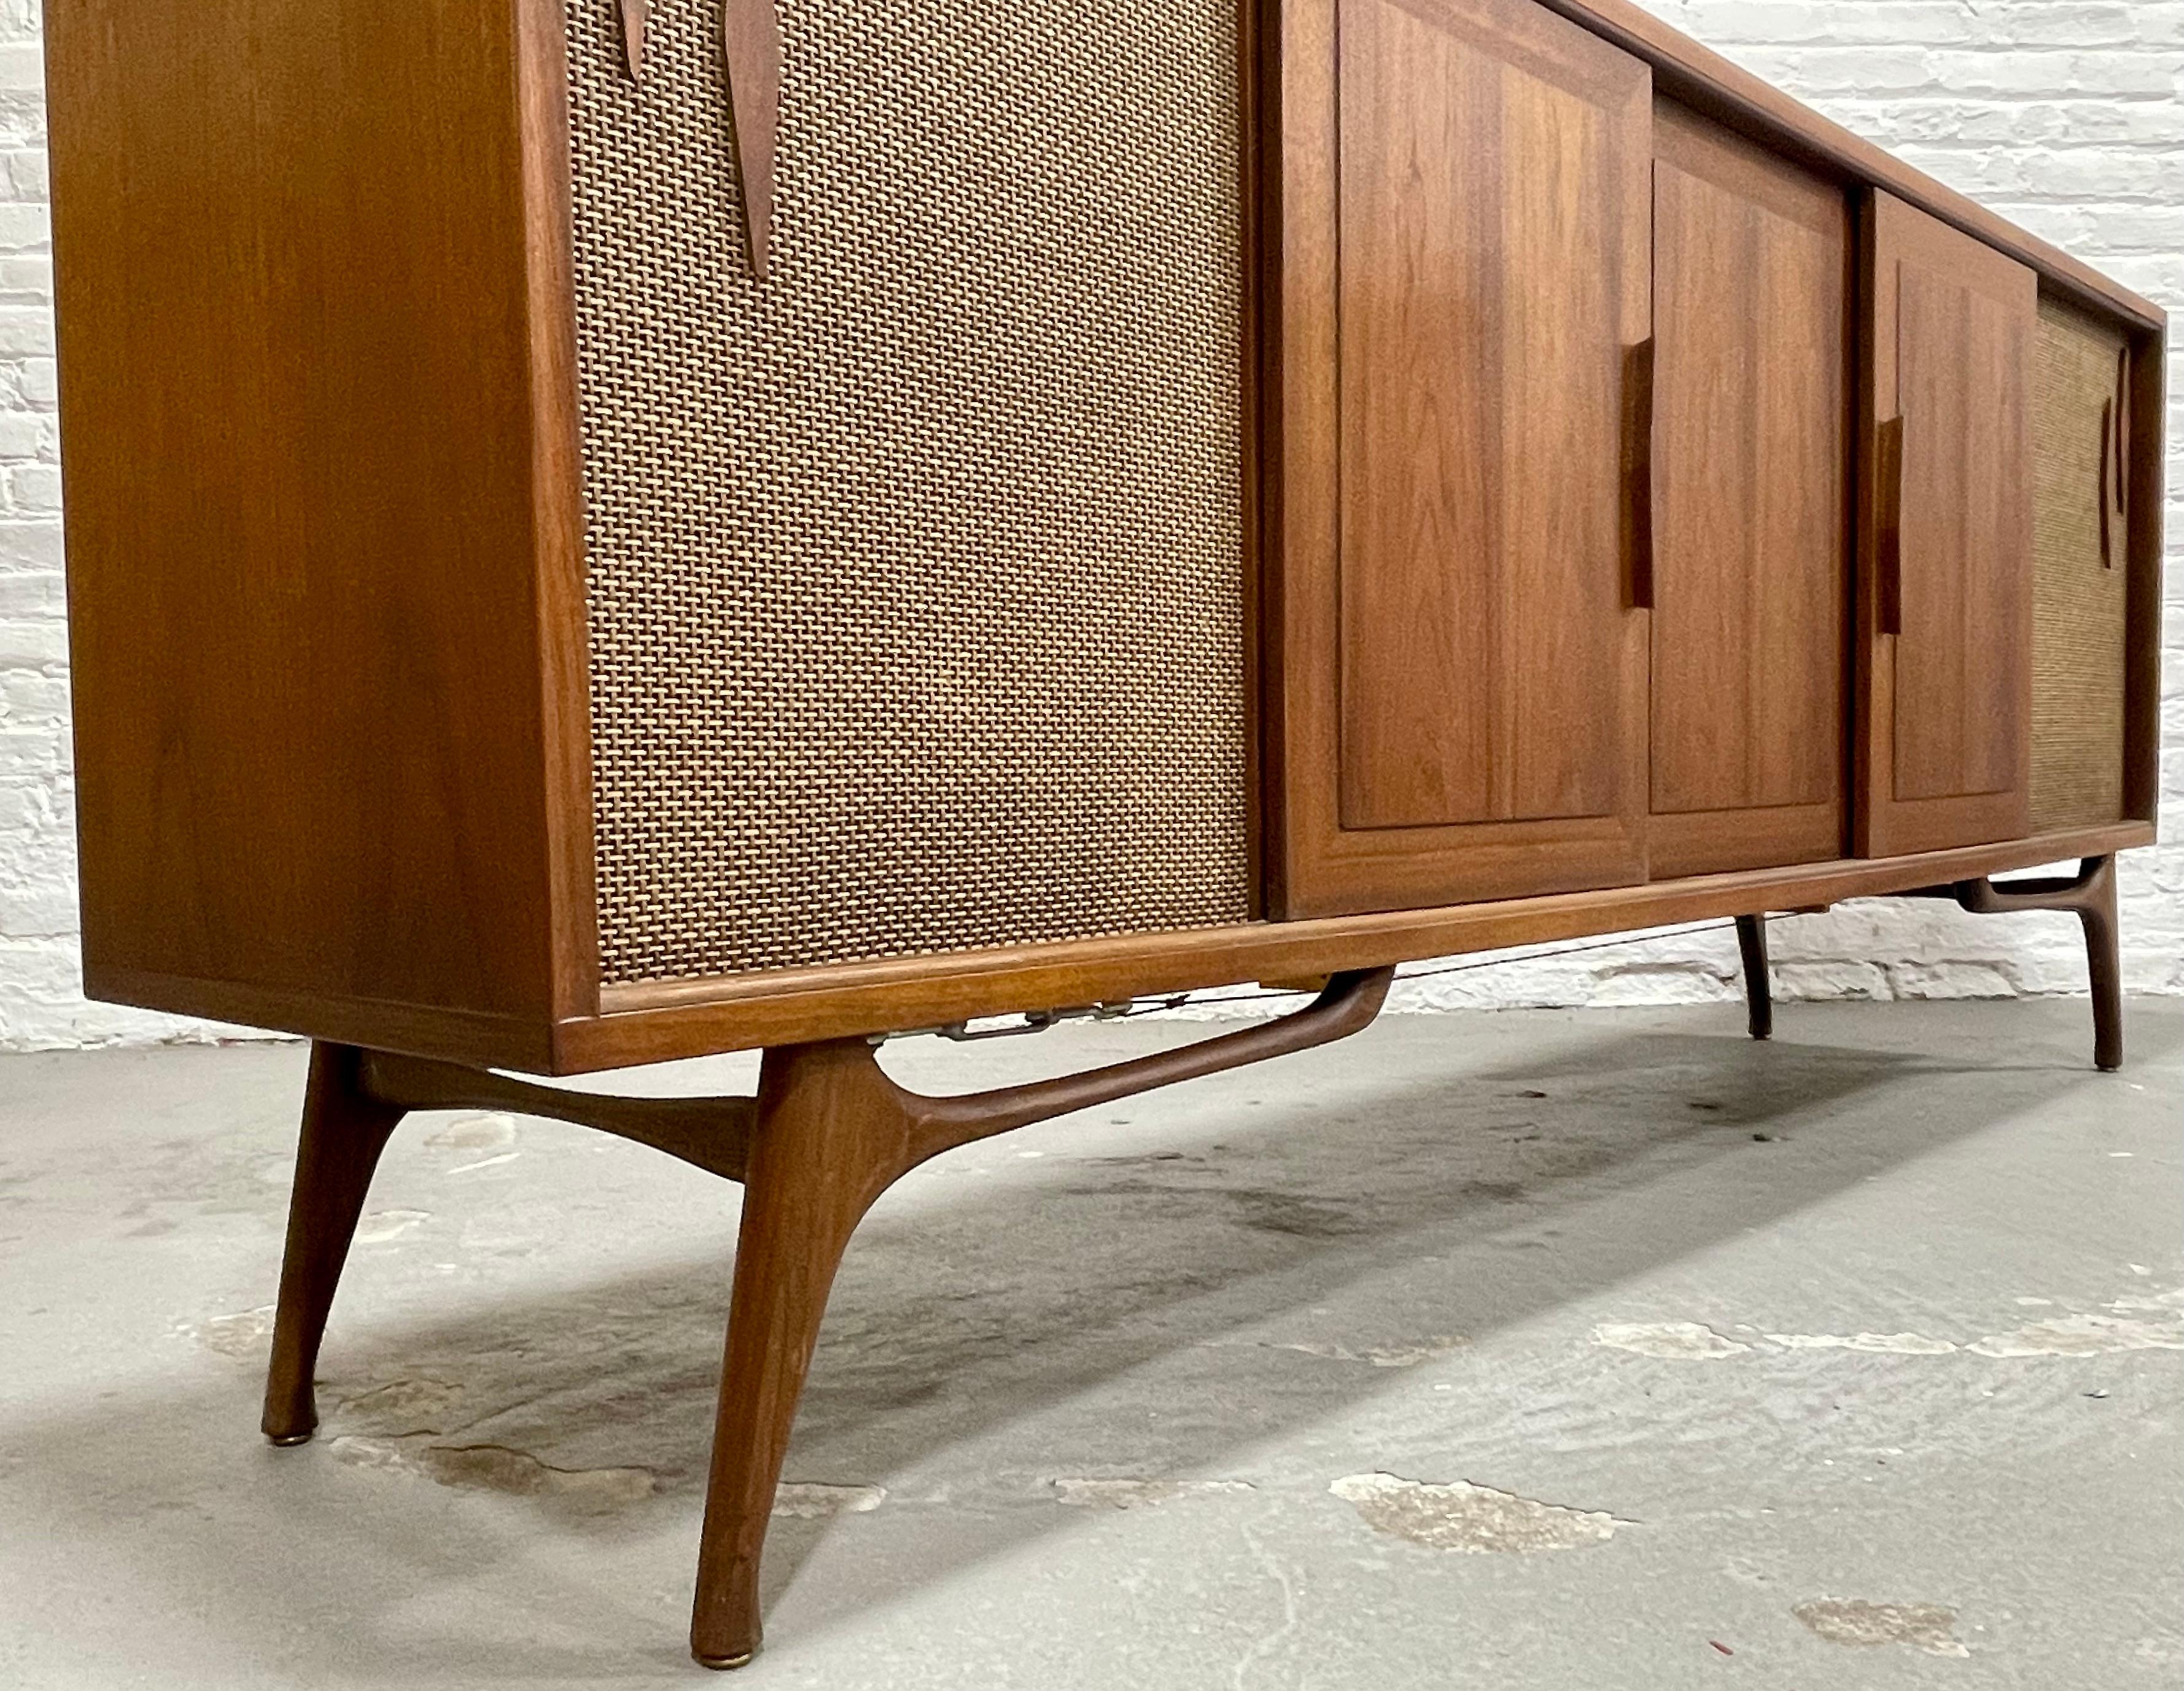 Extra LONG Mid Century MODERN Walnut Stereo Cabinet / CREDENZA / Media Stand 10